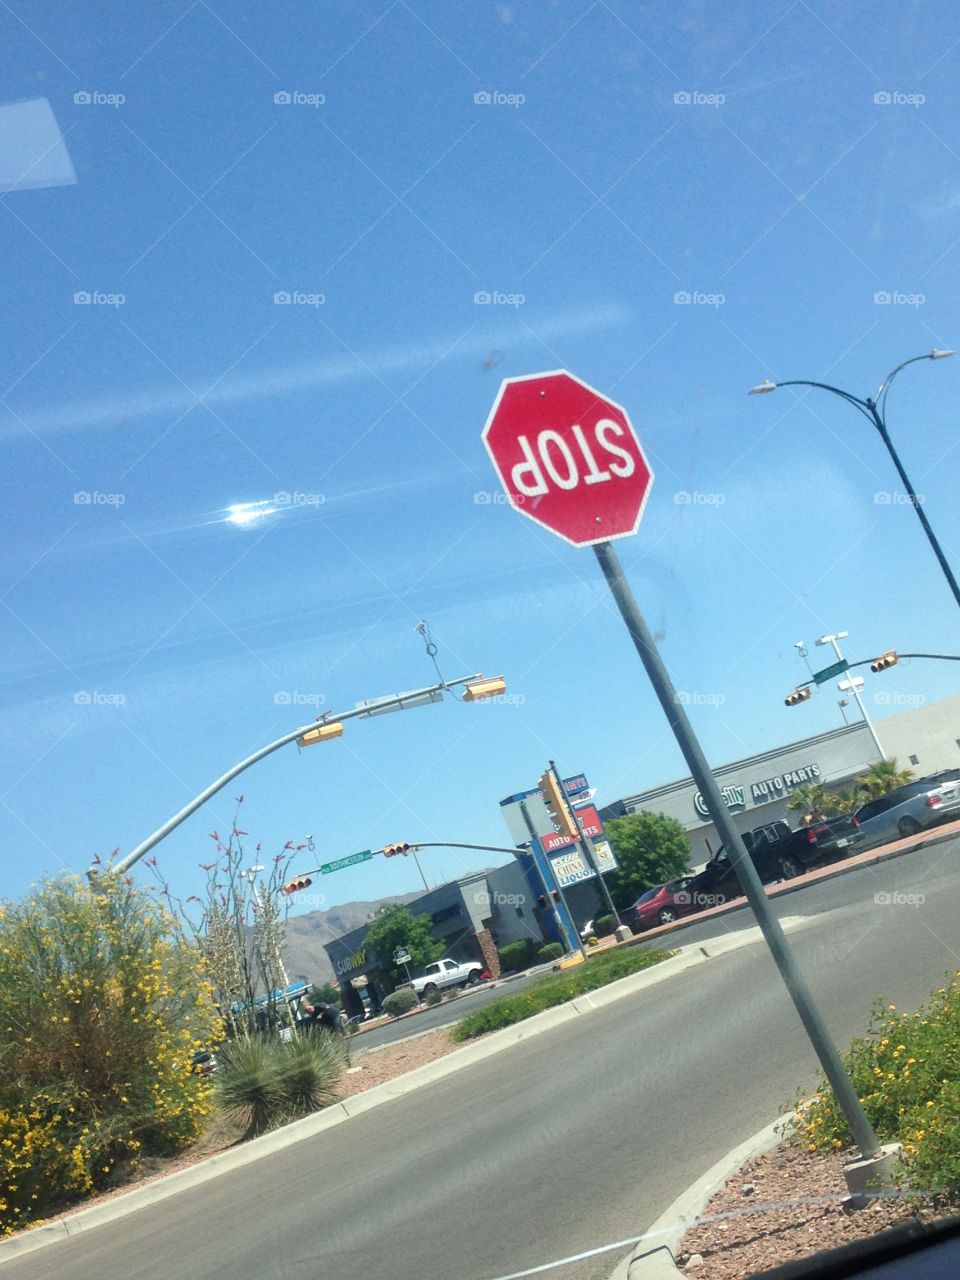 Upside-down stop sign . Found it mildly amusing 